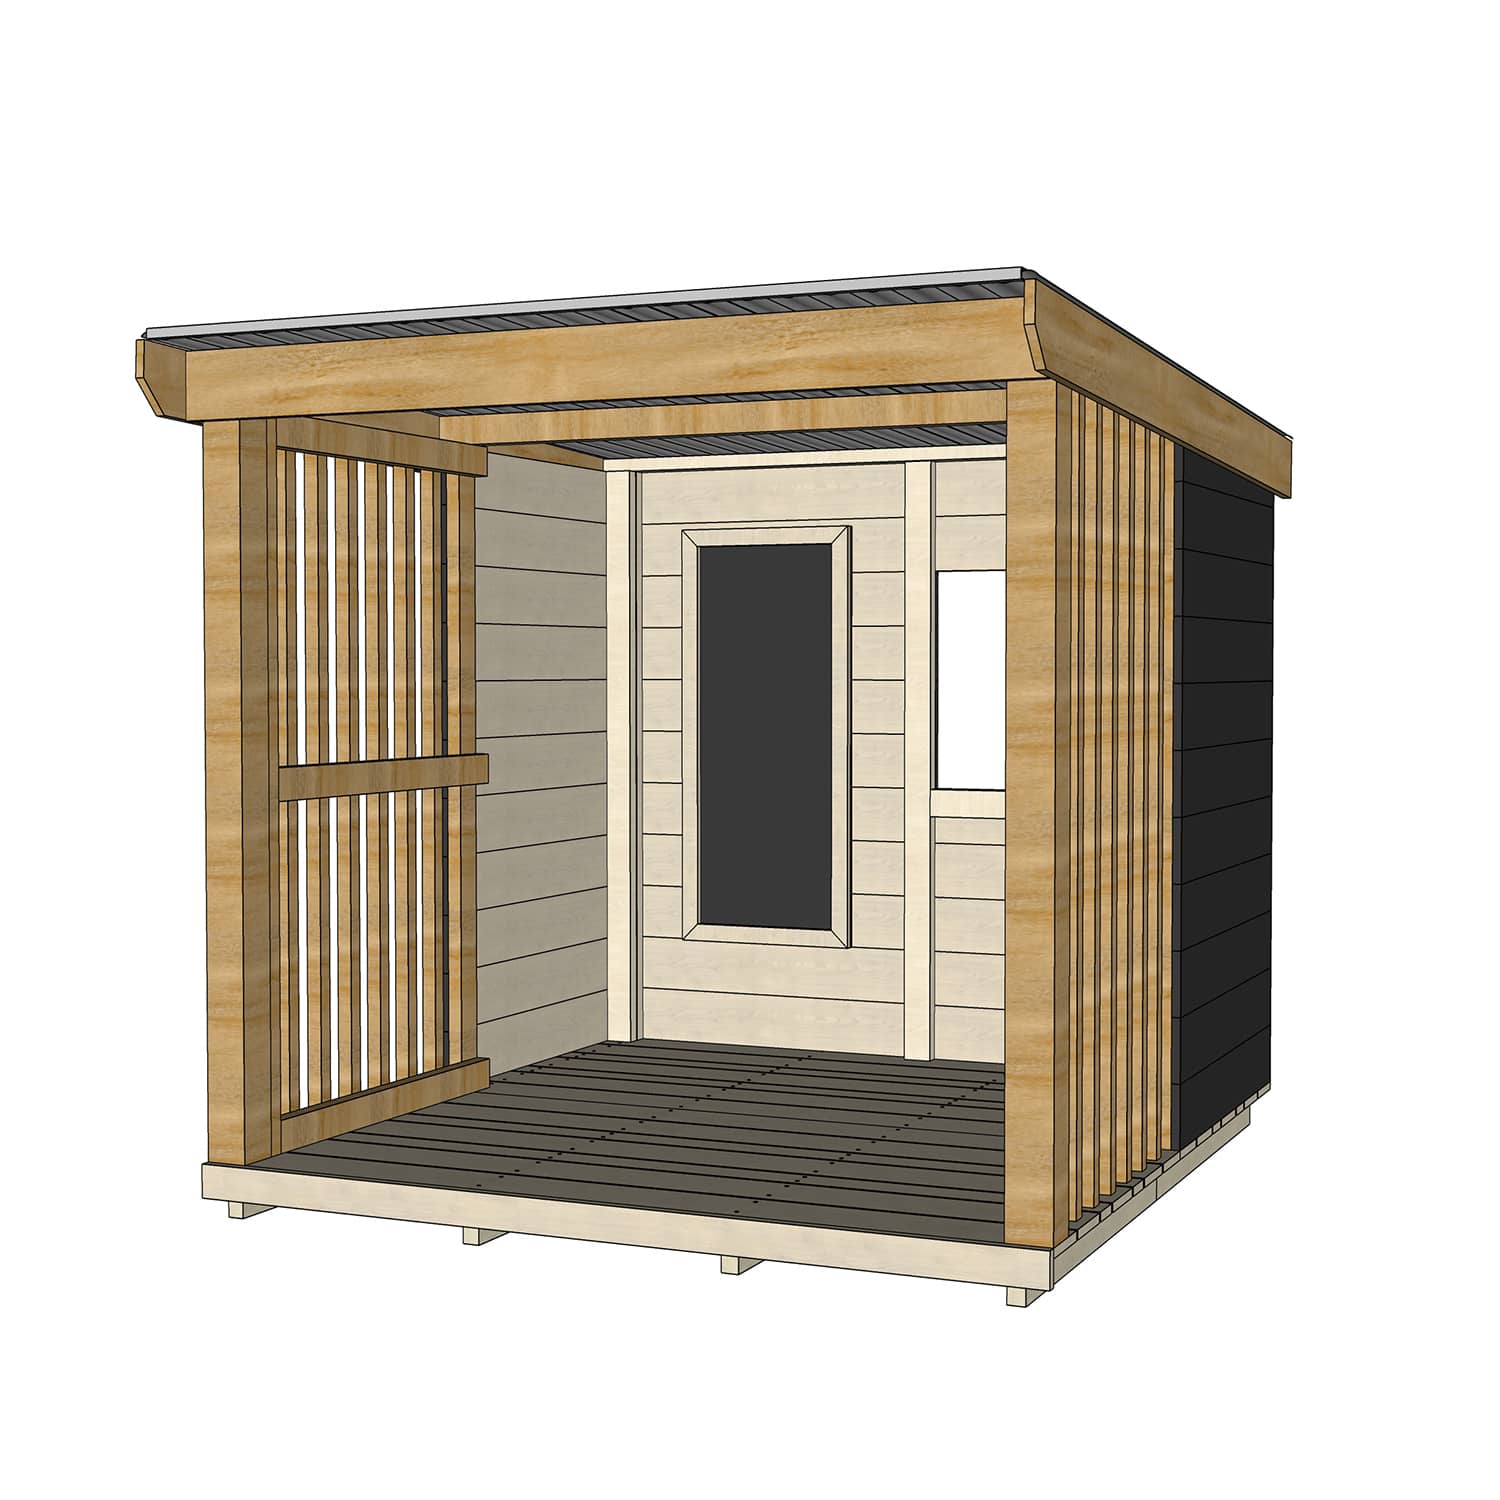 Painted pine cubby shelter with window and open front for good supervision